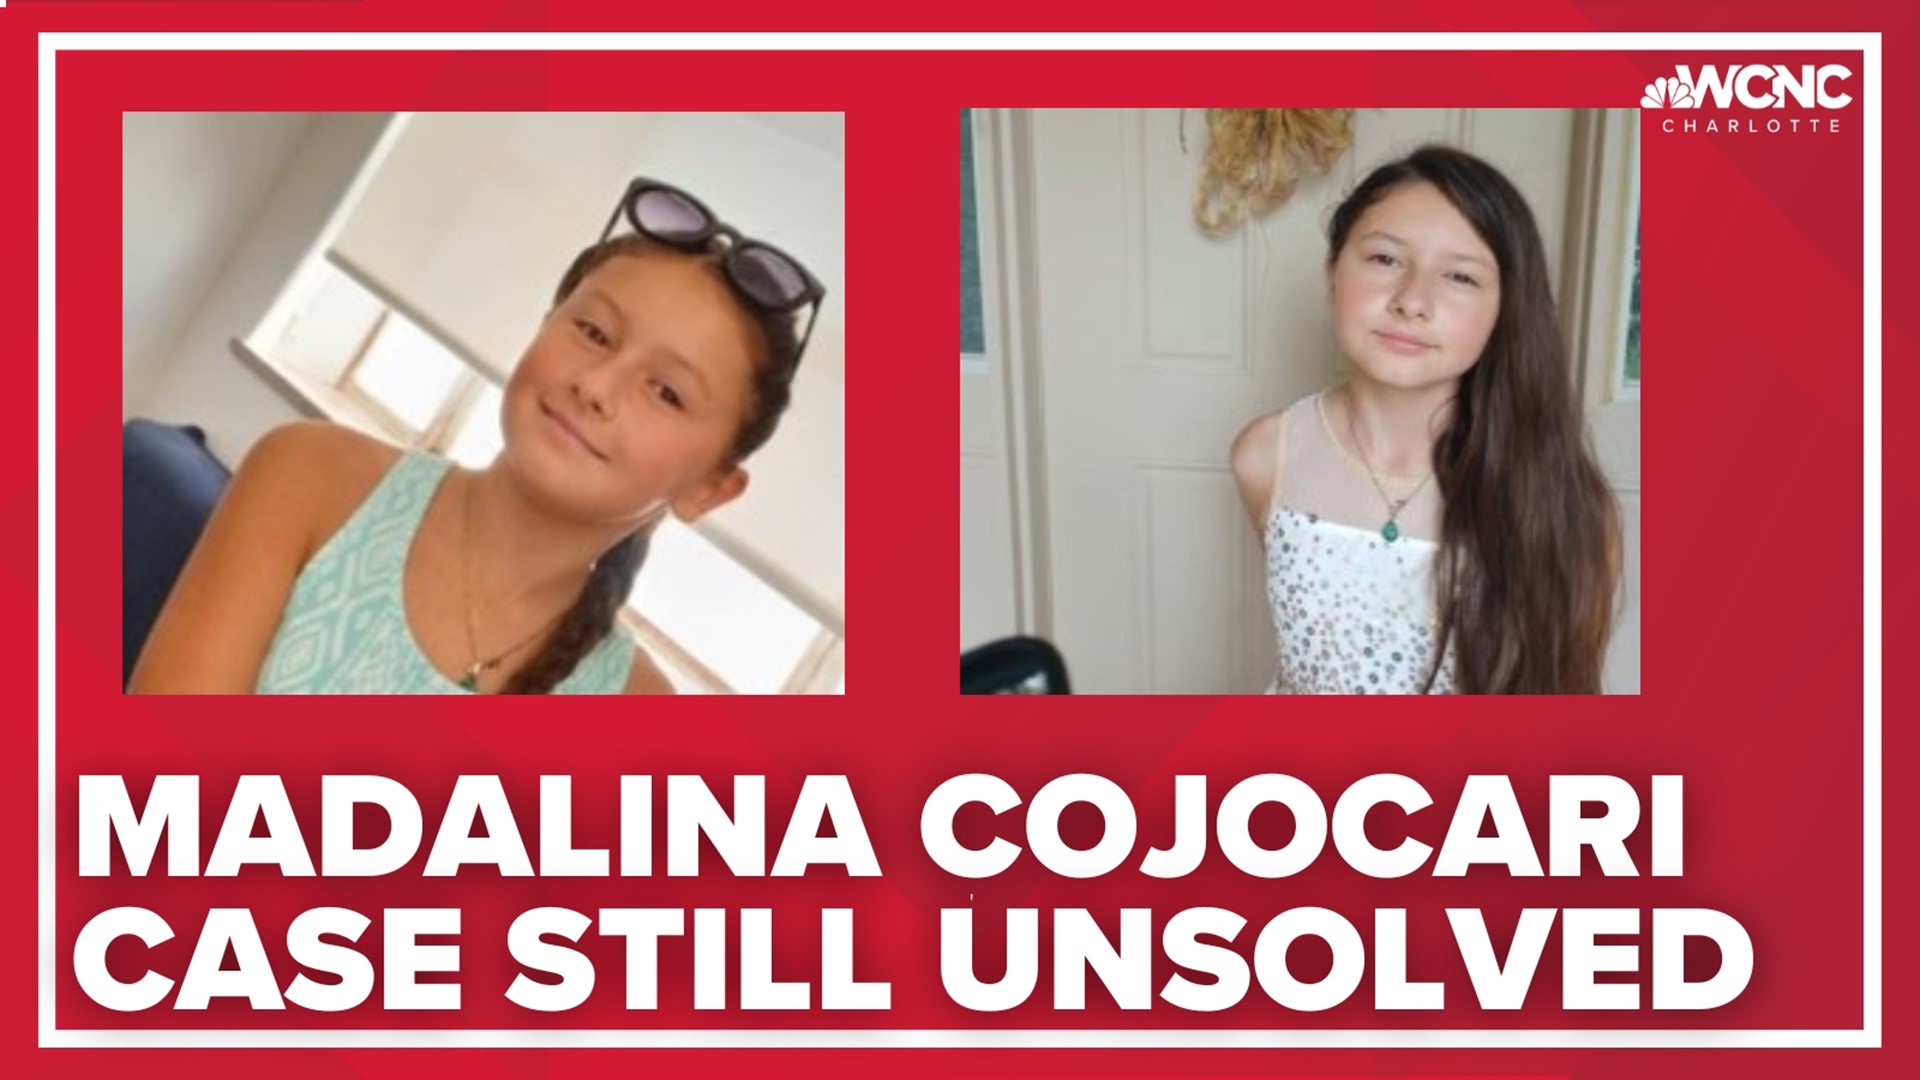 The case has gotten a lot of attention in online true crime forums, many of whom are trying to find out what happened to 11-year-old Madalina.